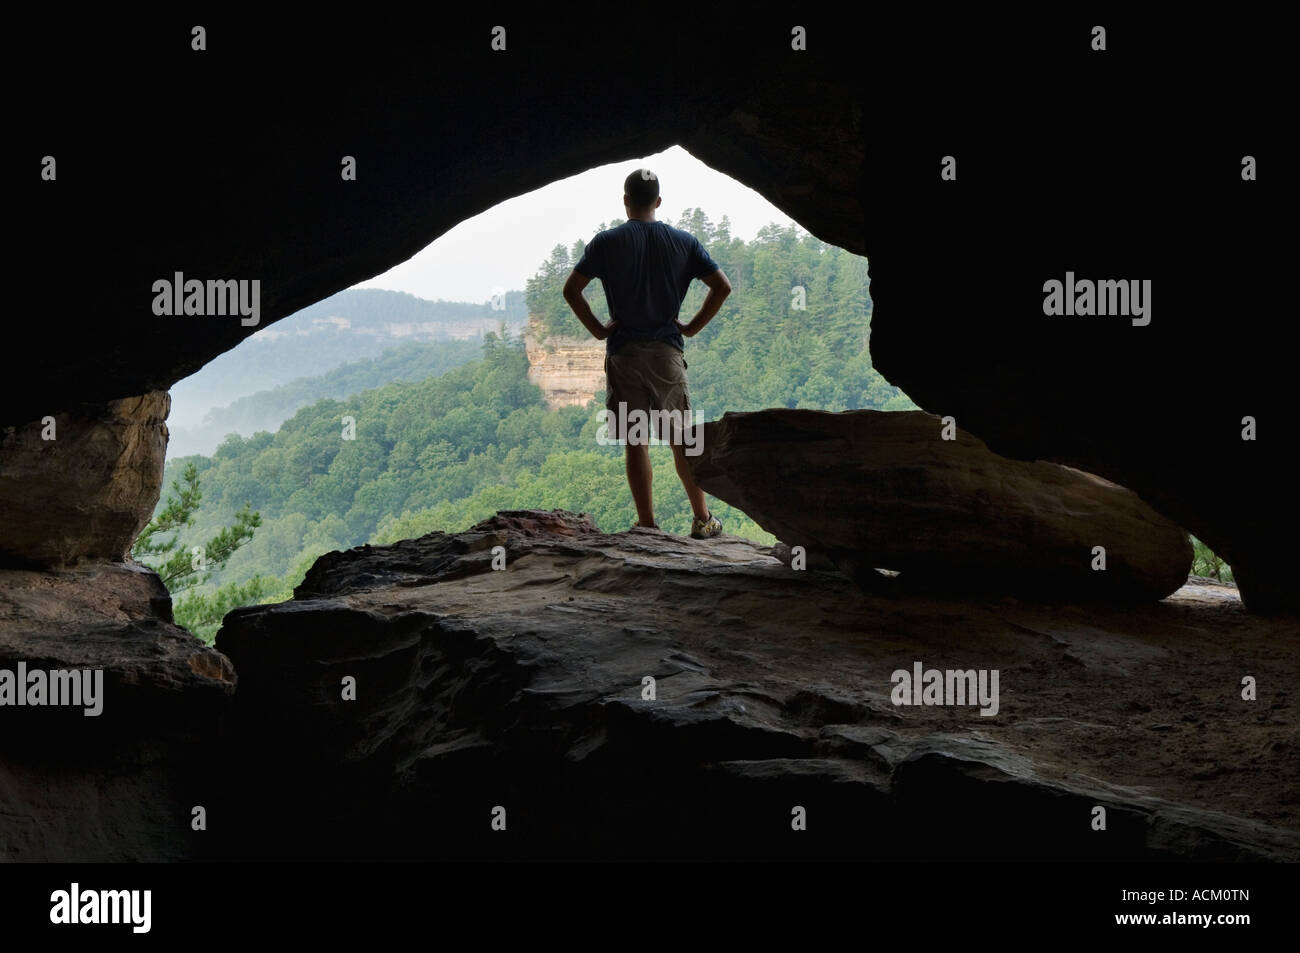 Hiker Silhouetted Against Window on Cliff Face Looking Out over Wilderness Area Red River Gorge Geological Area Kentucky Stock Photo